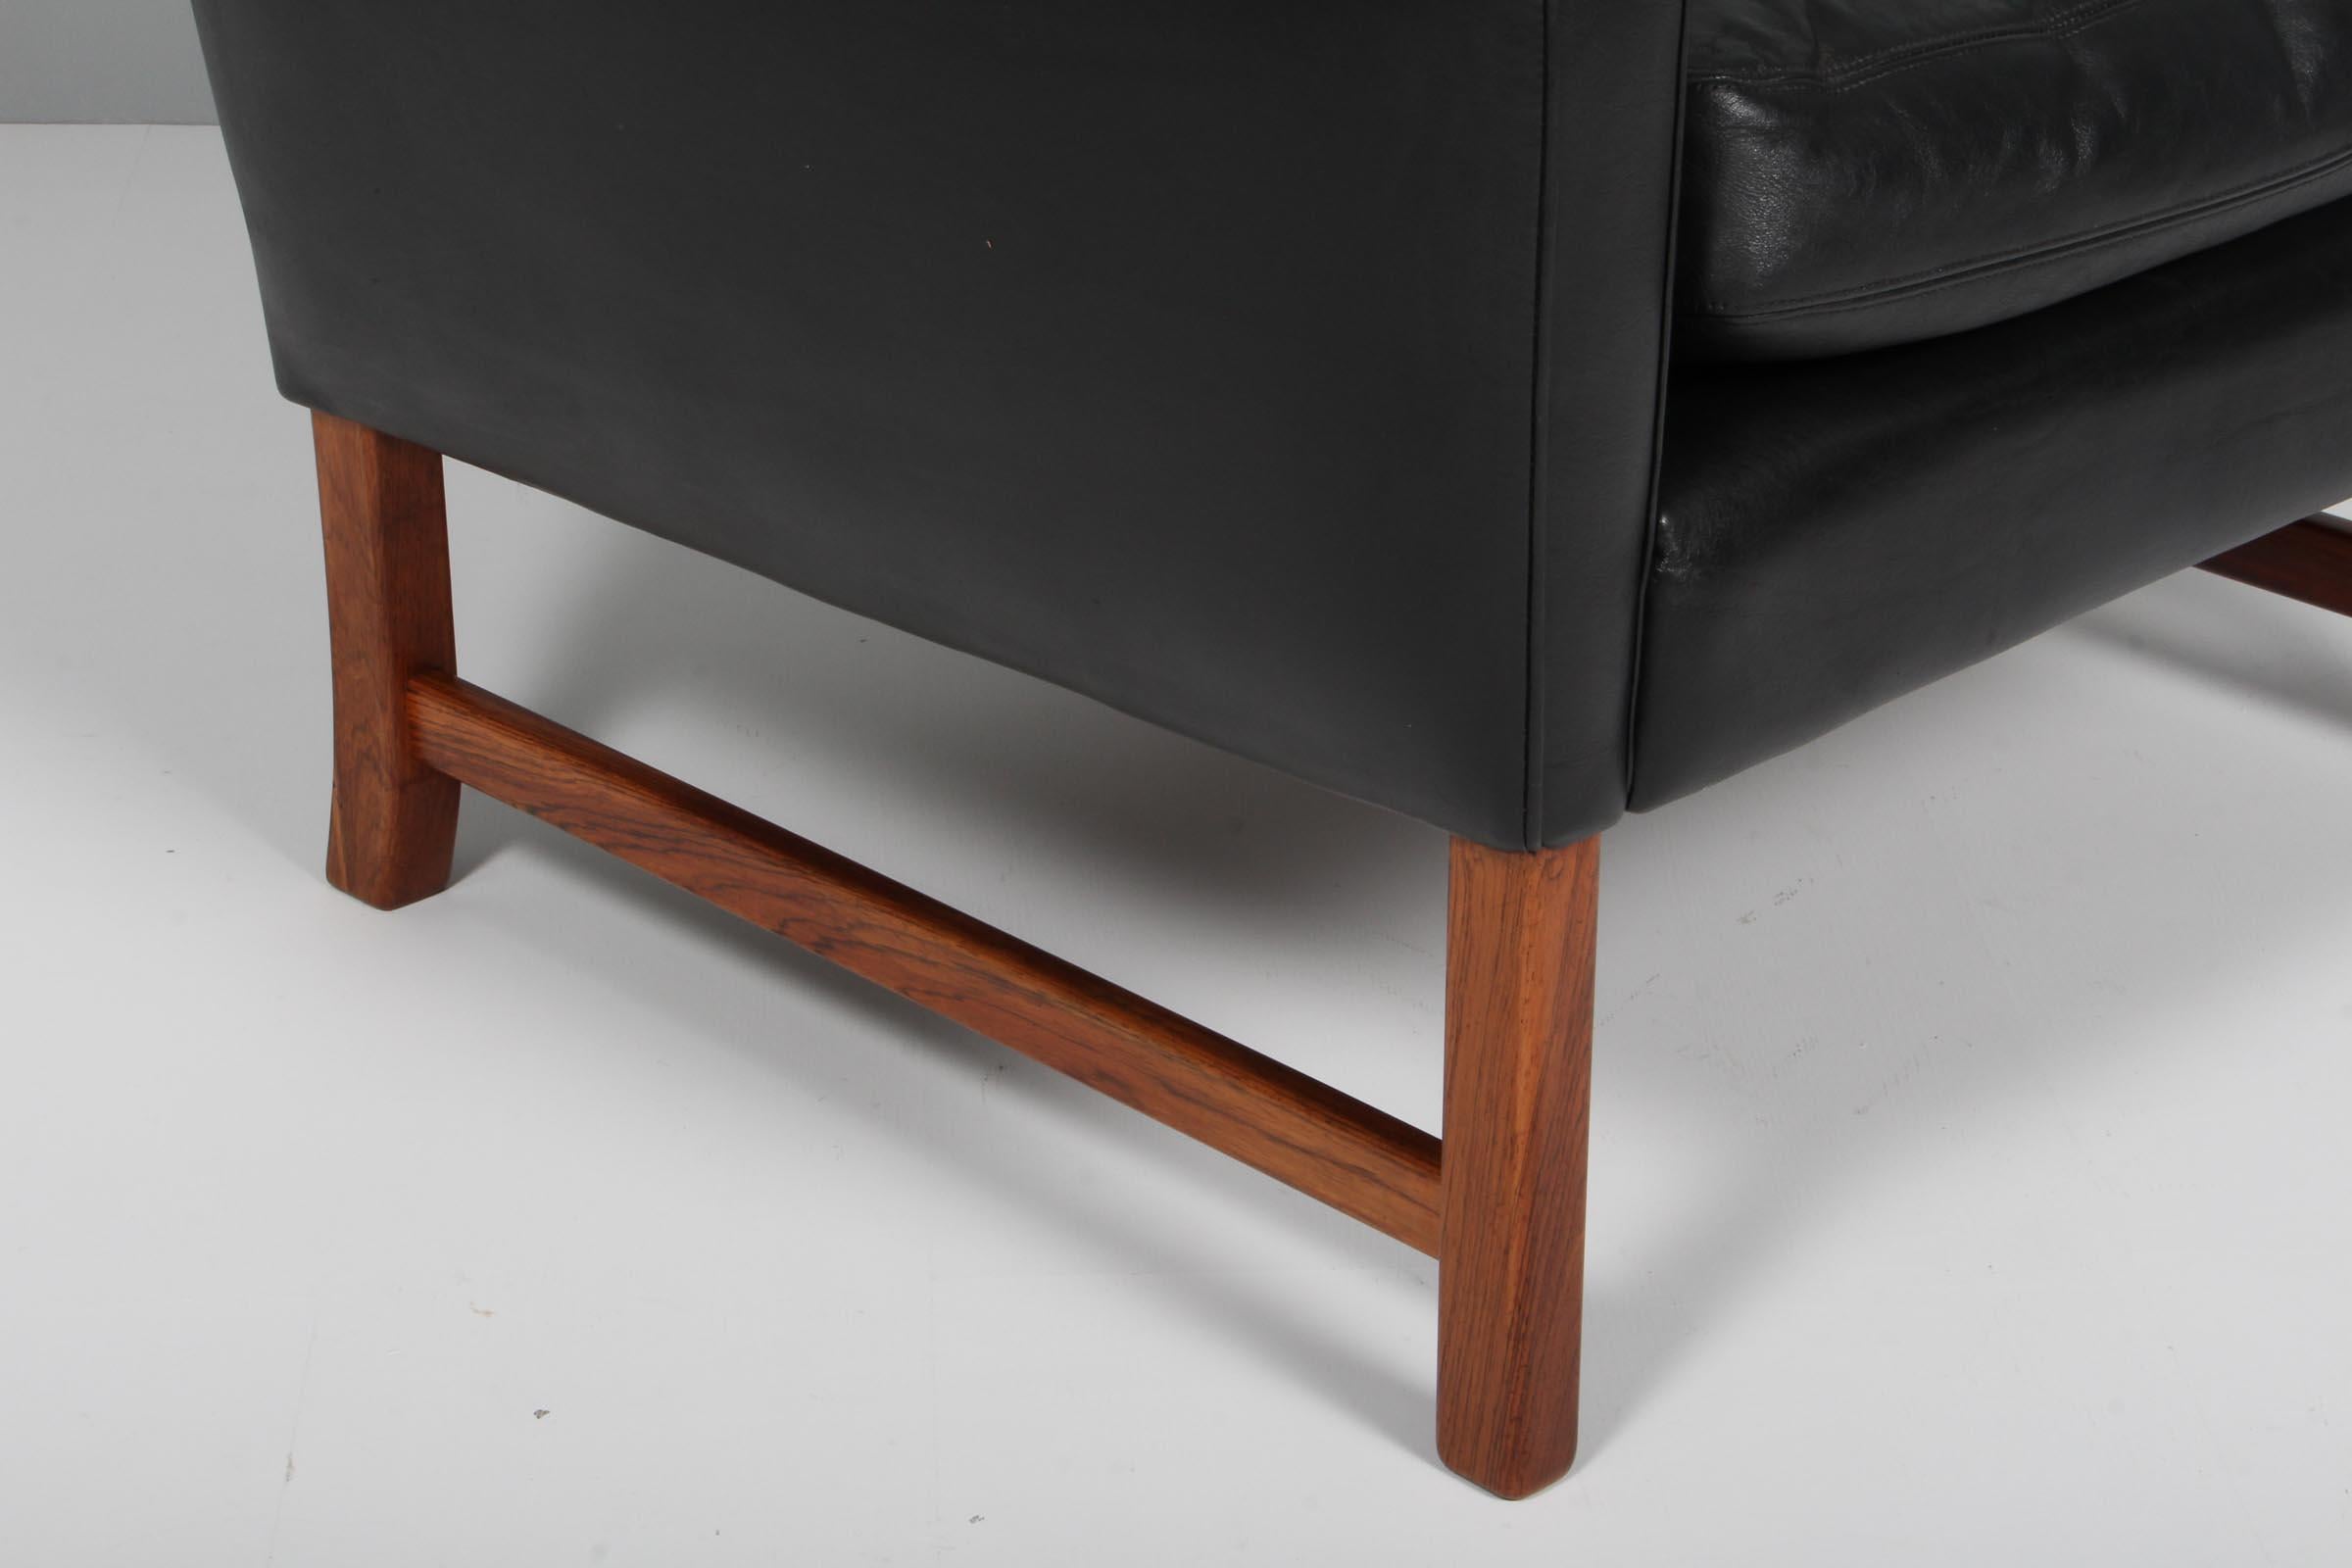 Norwegian Frederik Kayser Lounge Chair, Rosewood and Leather, Norway